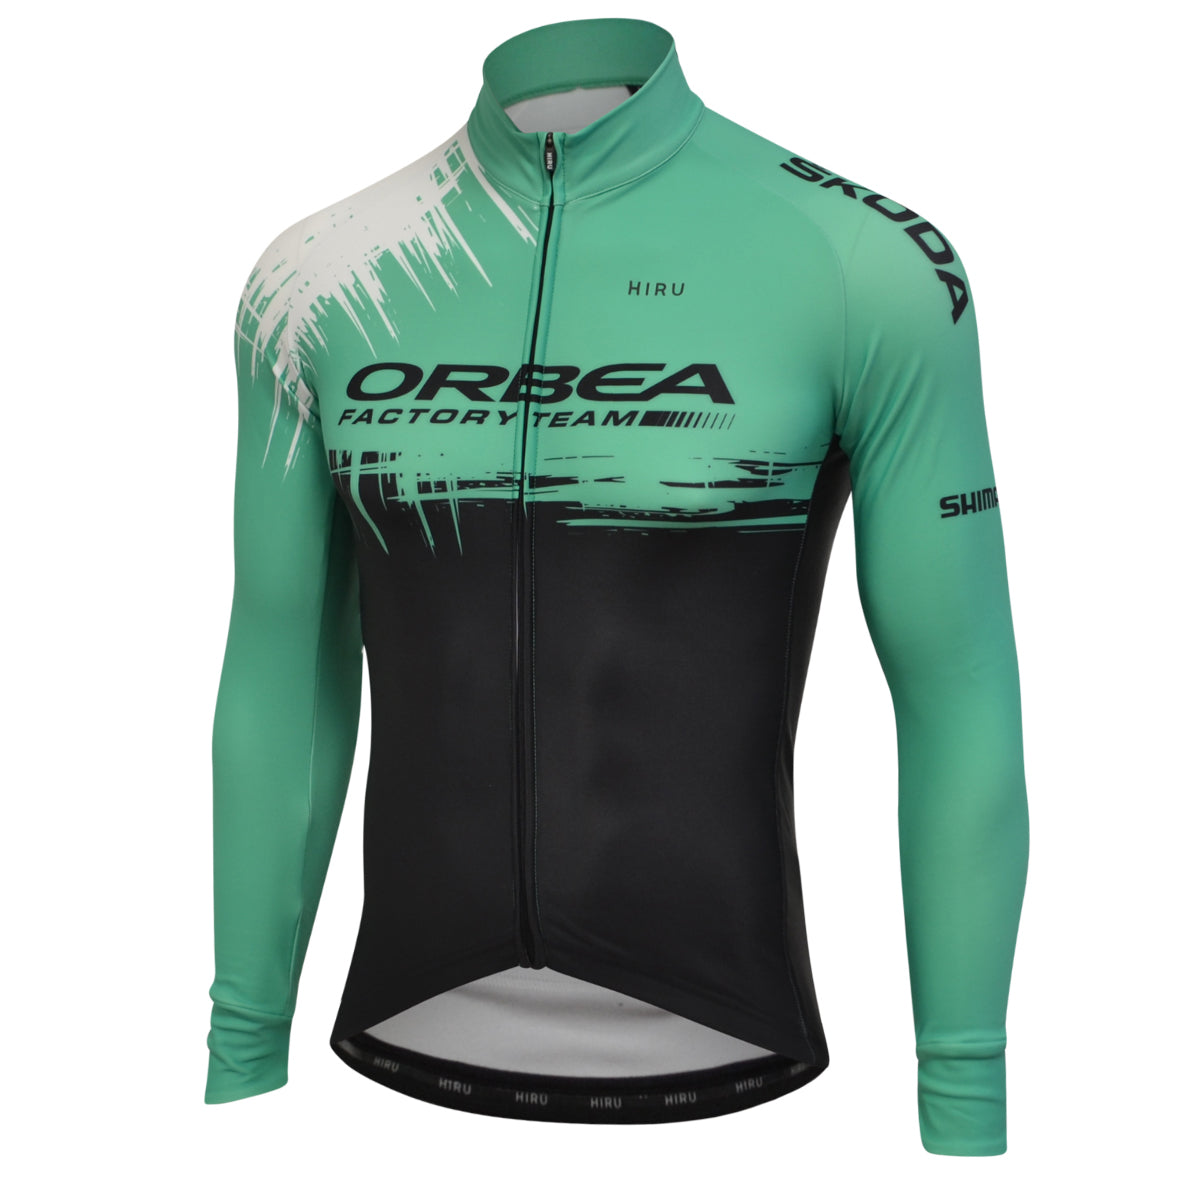 Maillot mangas Orbea Team 2021 | All4cycling